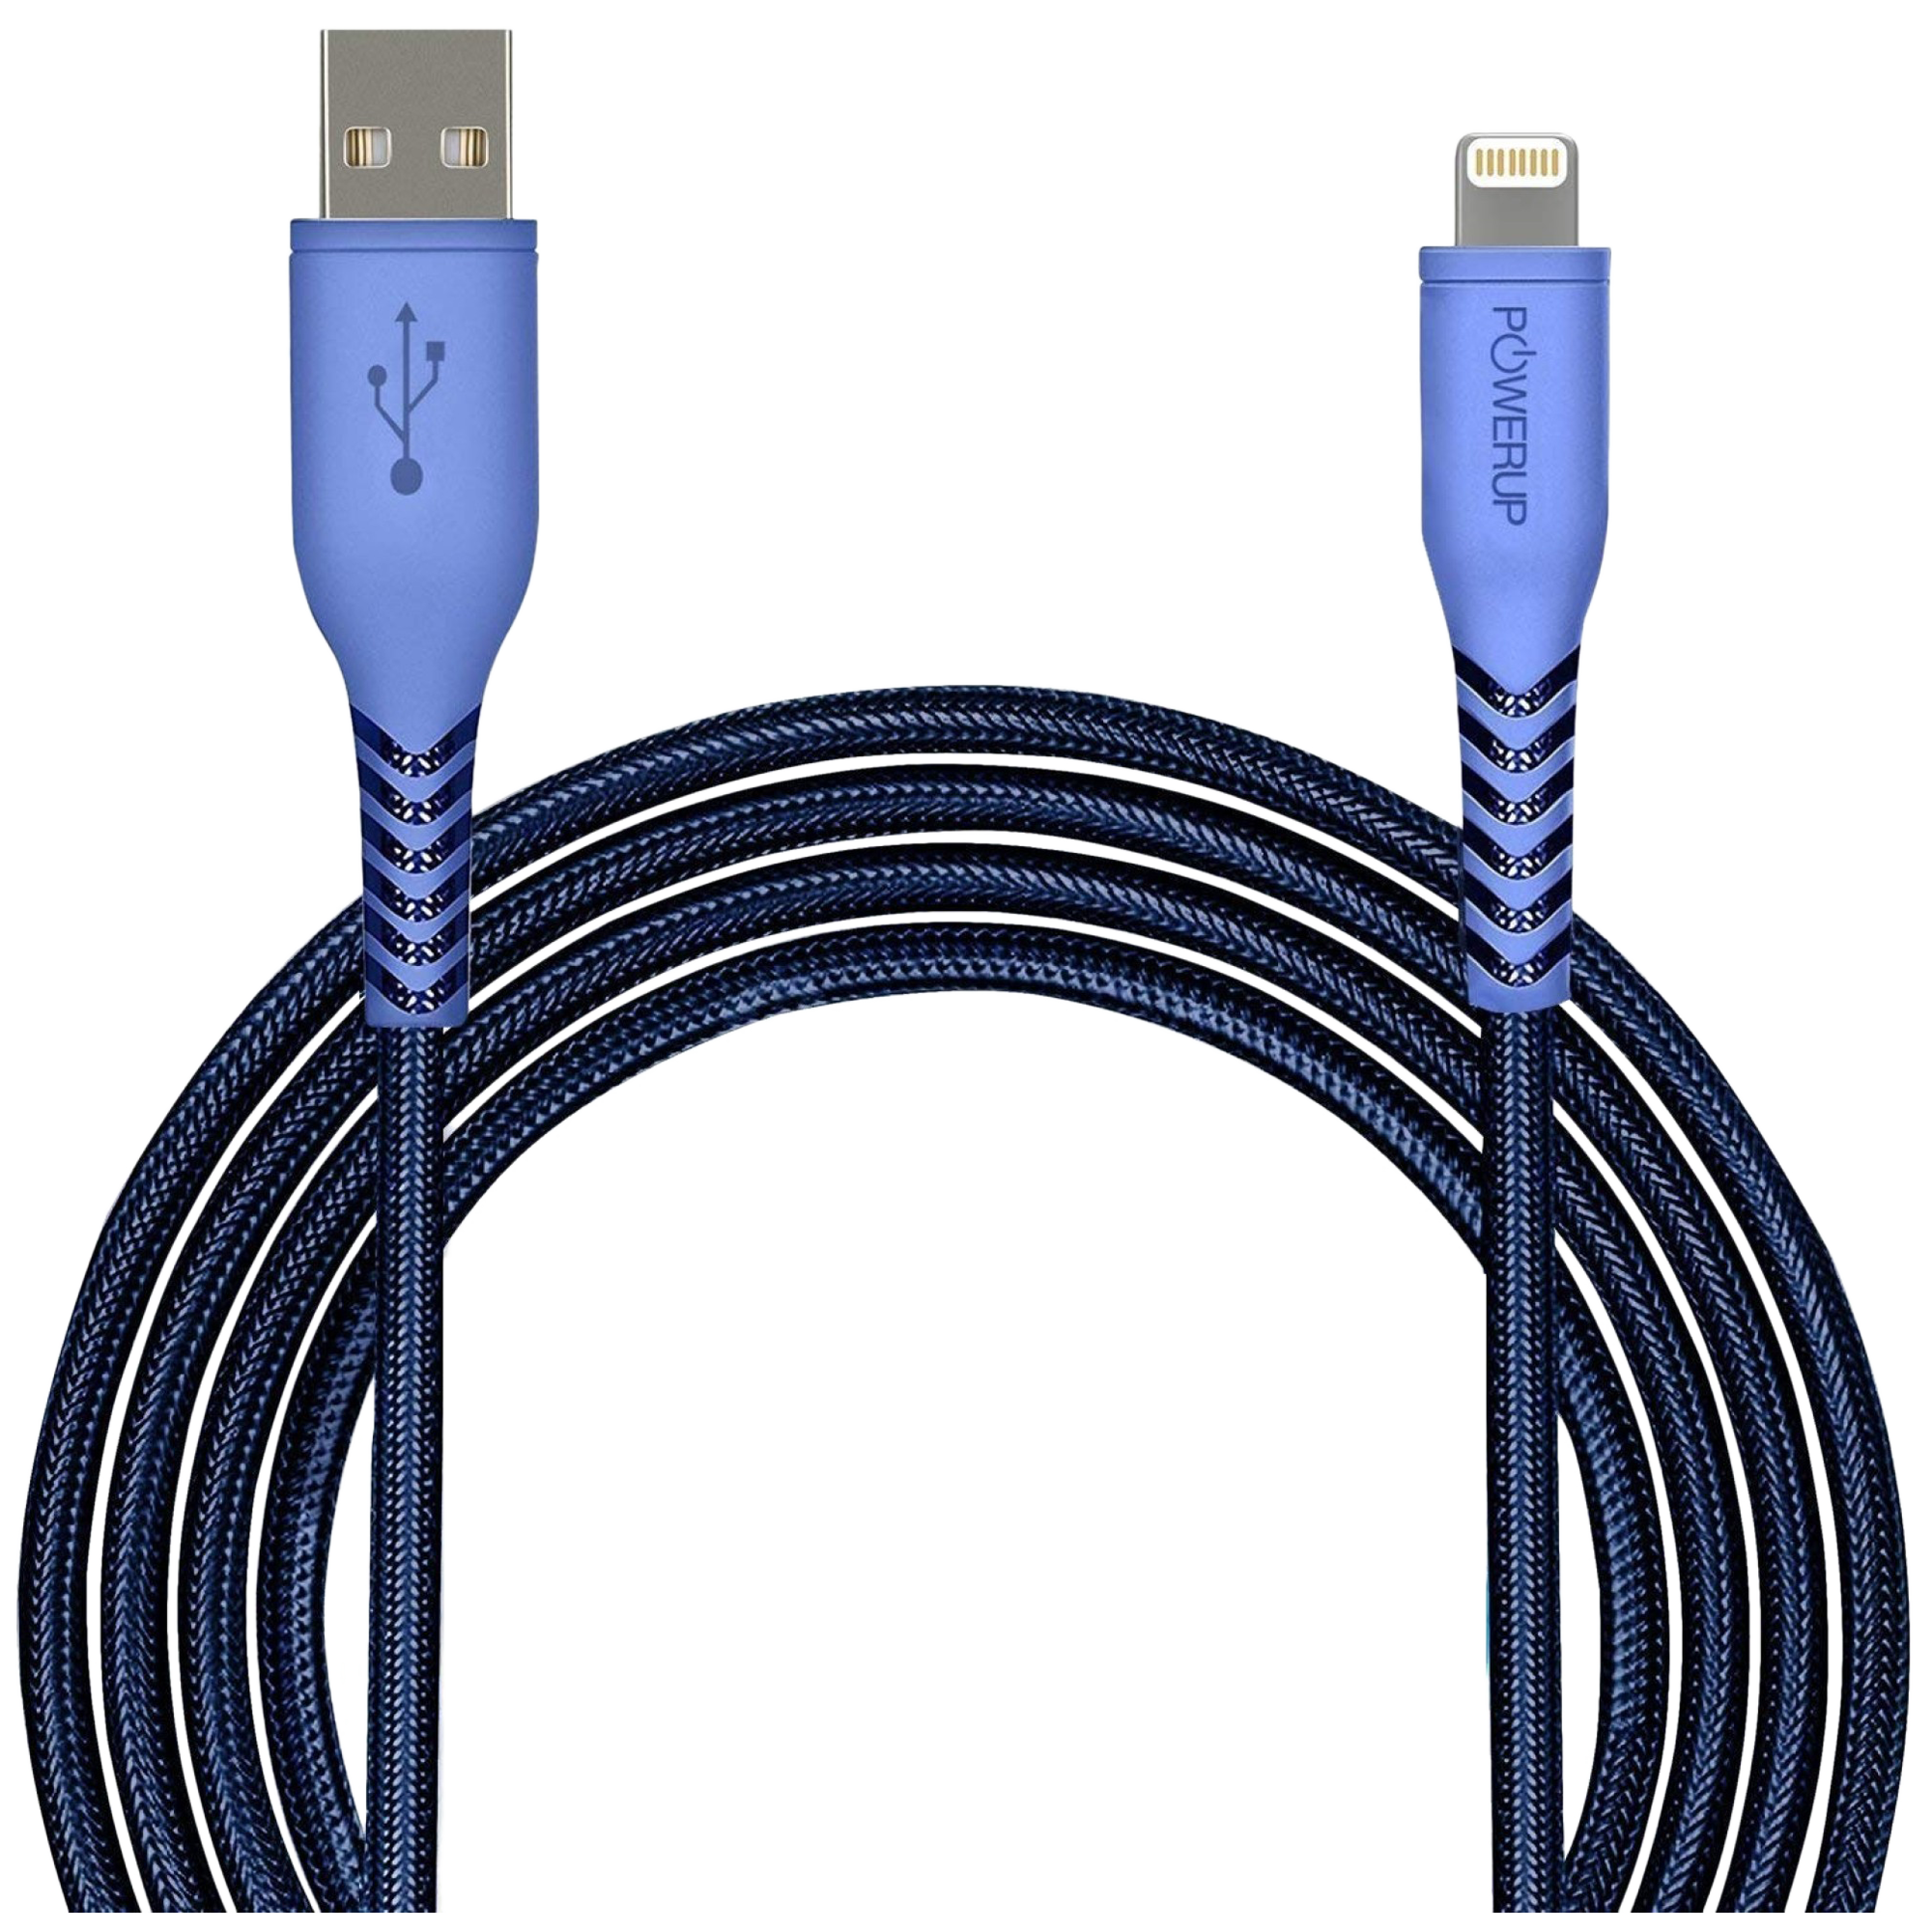 Powerup Braided Nylon 1.5 Meter USB 3.0 Type-A to Lightning Data Transfer Power/Charging USB Cable (480 Mbps Transmission Speed, PUP-CNL-15BL, Blue)_1